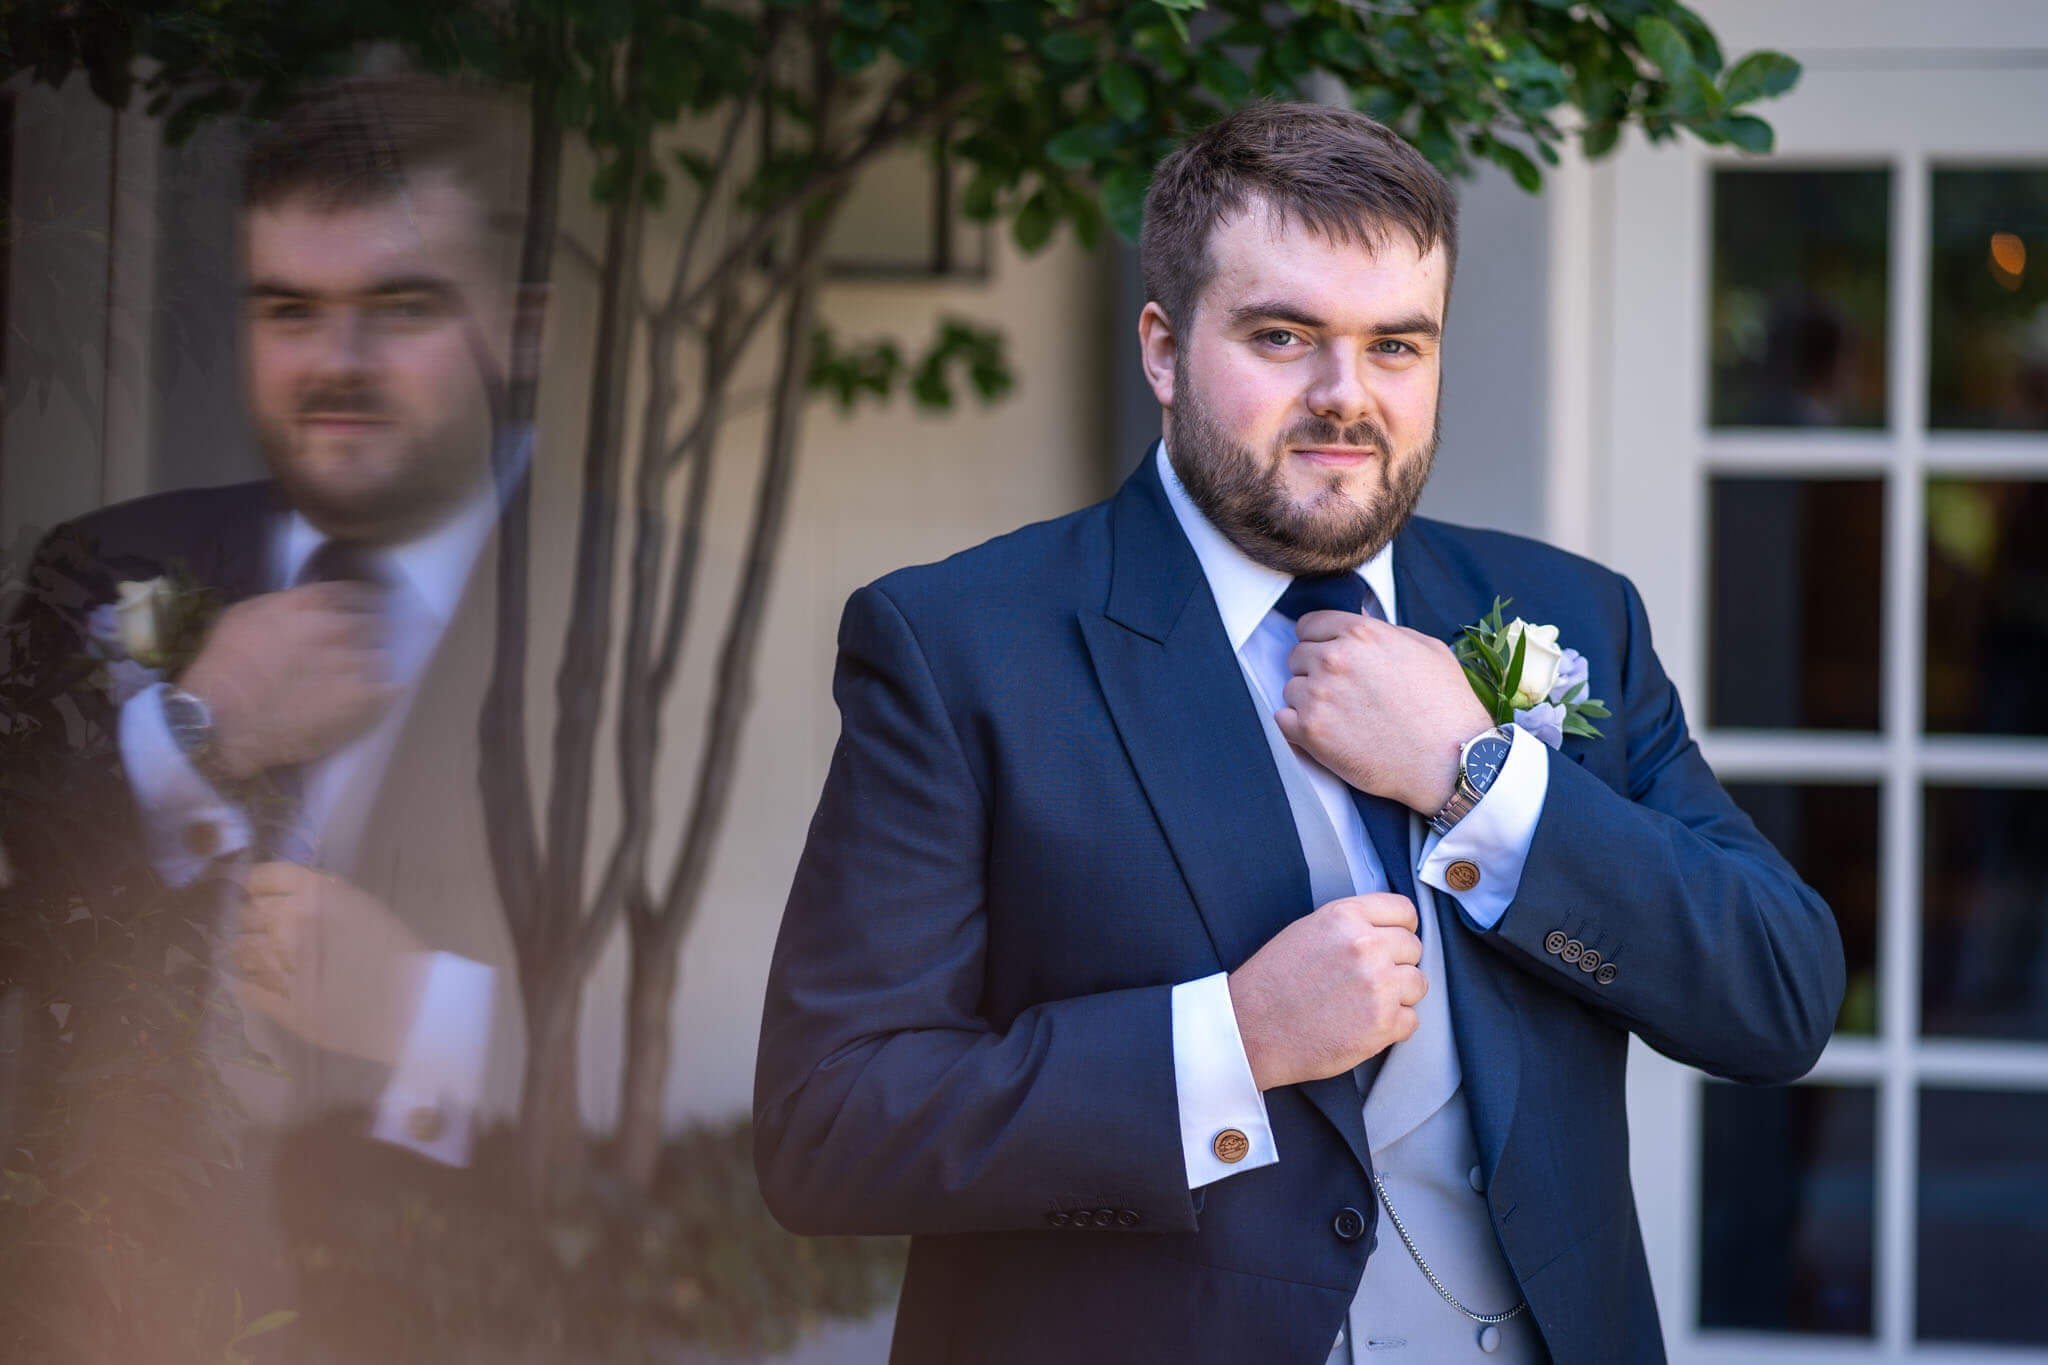 the groom wearing a blue suit ad grey waistcoat straightens his tie